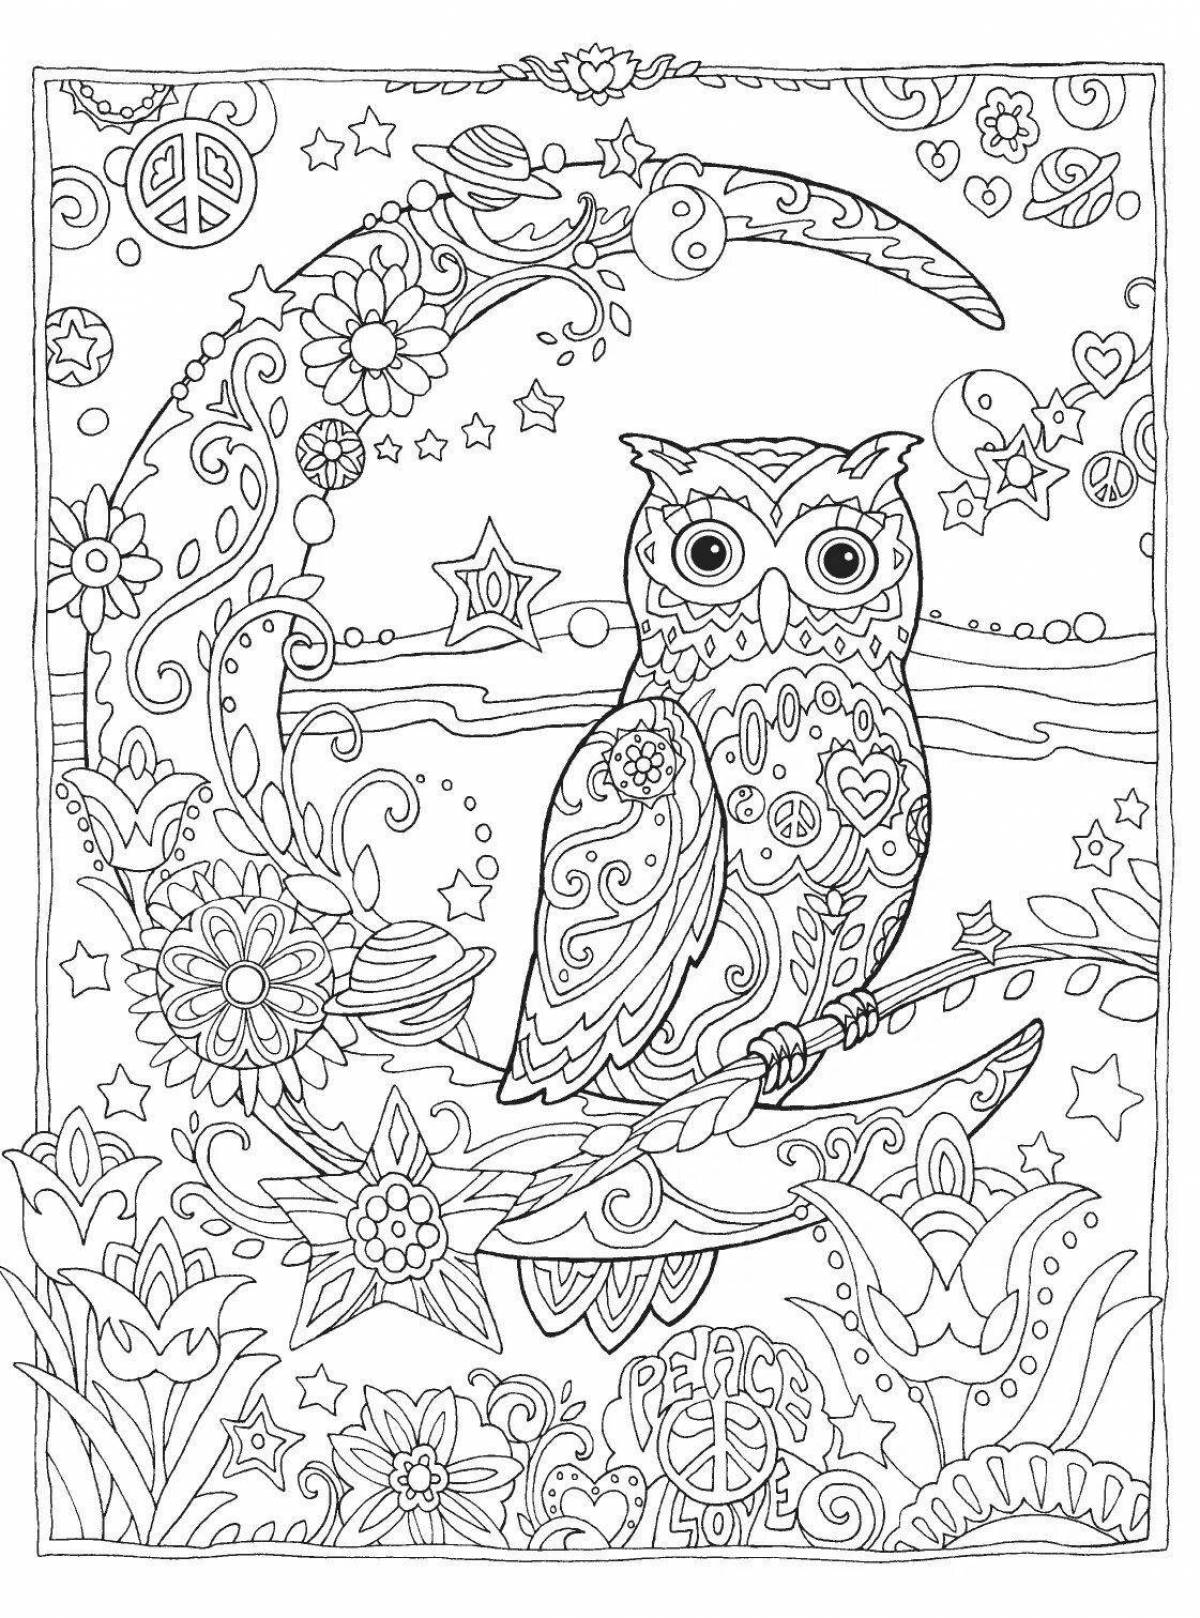 Mentally relaxing coloring book for children